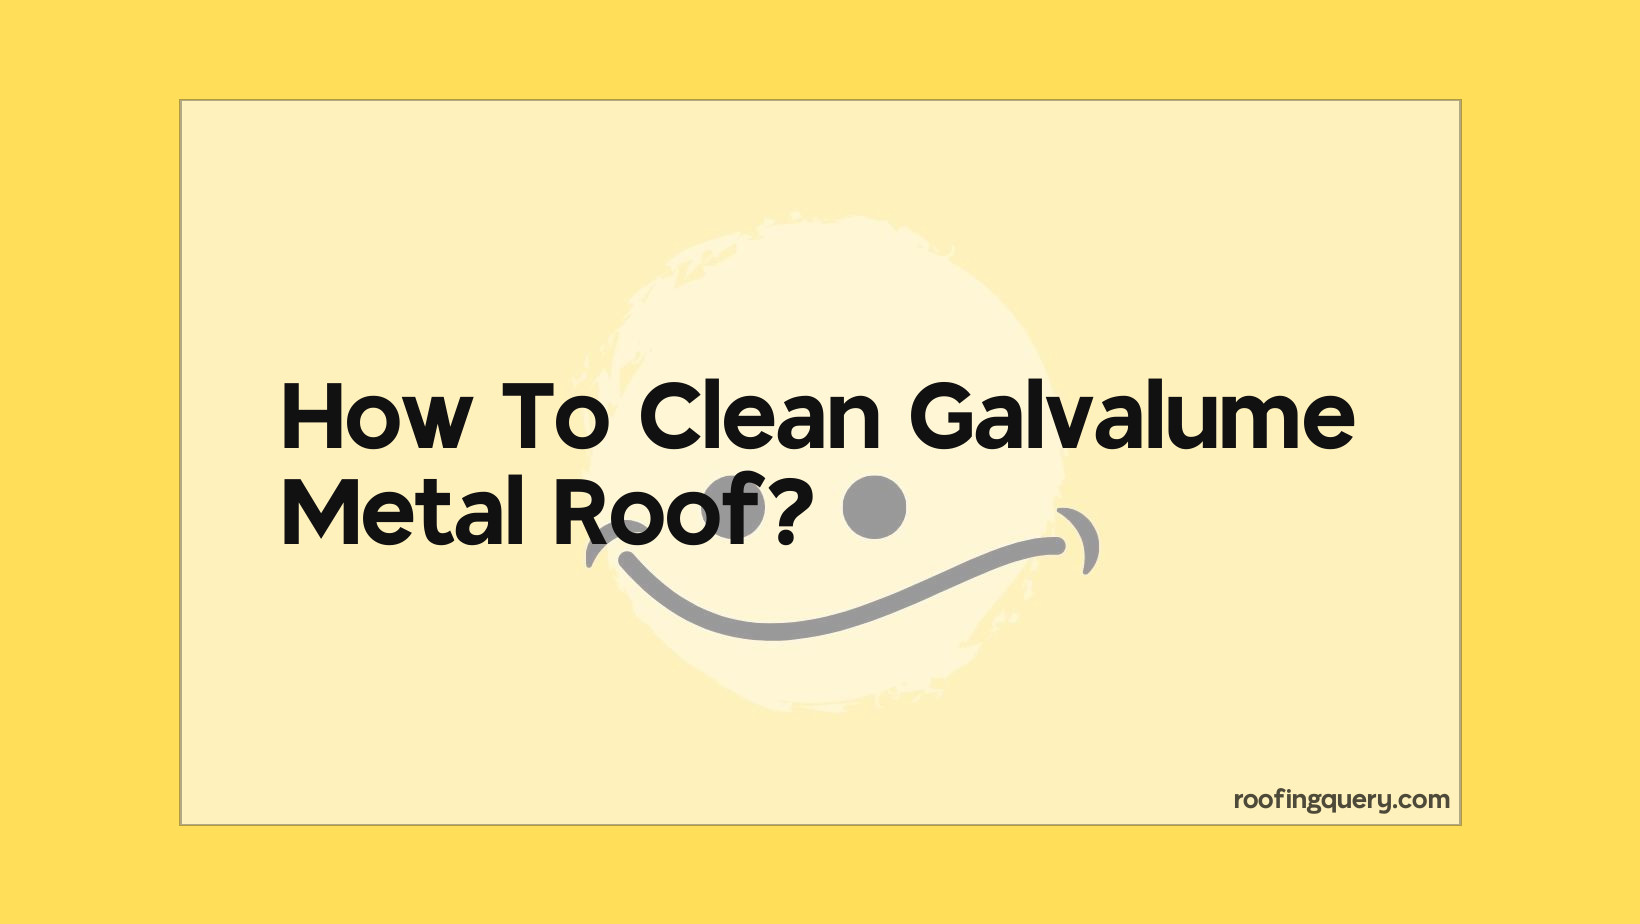 How To Clean Galvalume Metal Roof